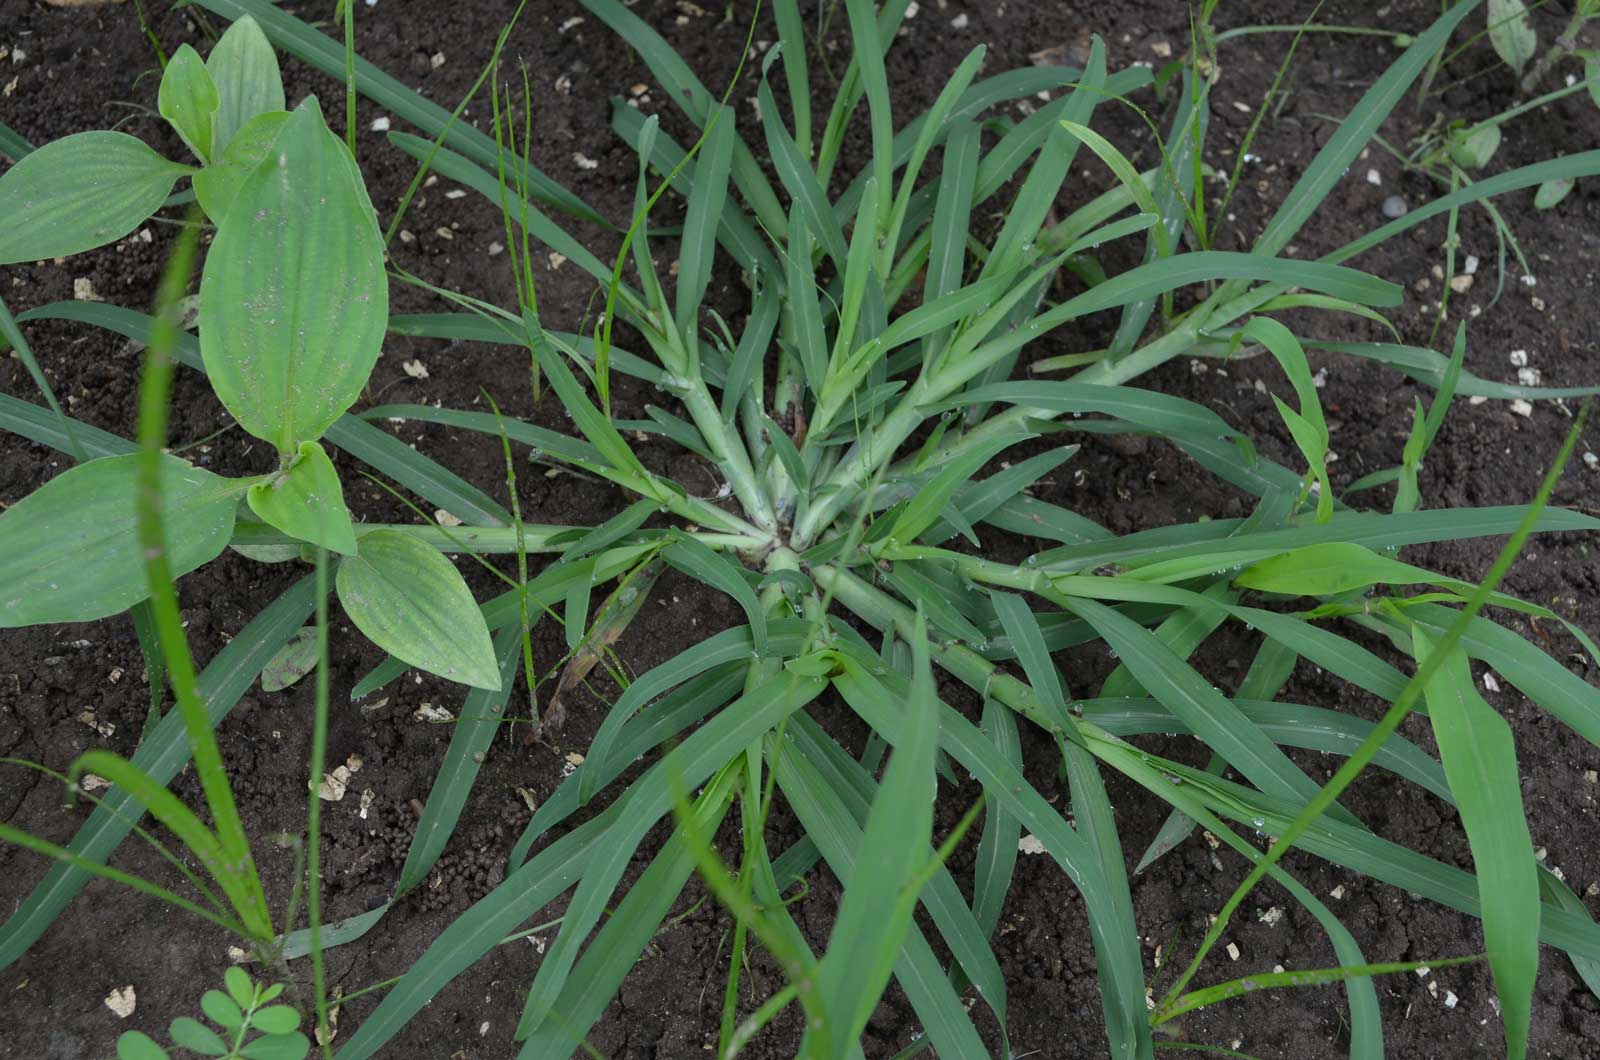 Crabgrass weed control from Senske. Image of crabgrass growing in soil.